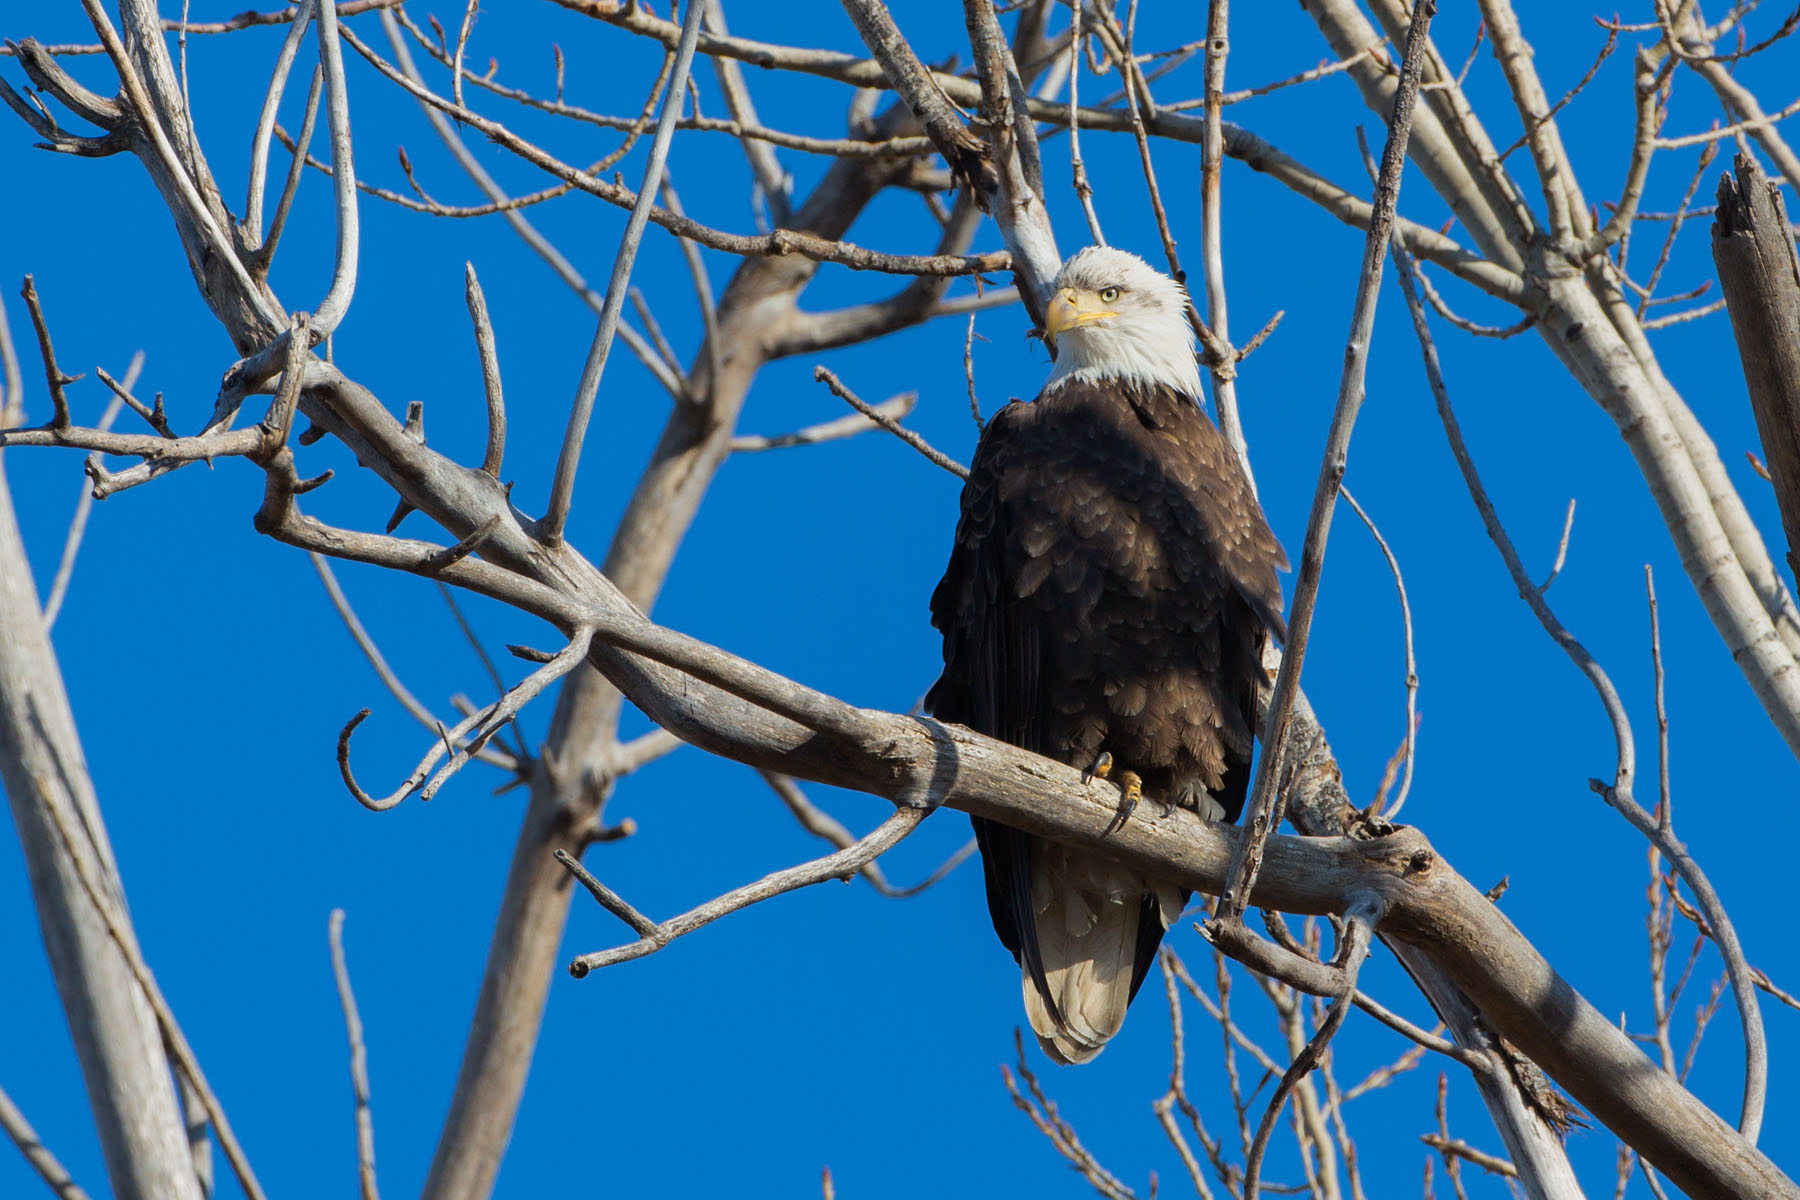 Bald Eagle, Loess Bluffs NWR, December 2019.  Click for next photo.